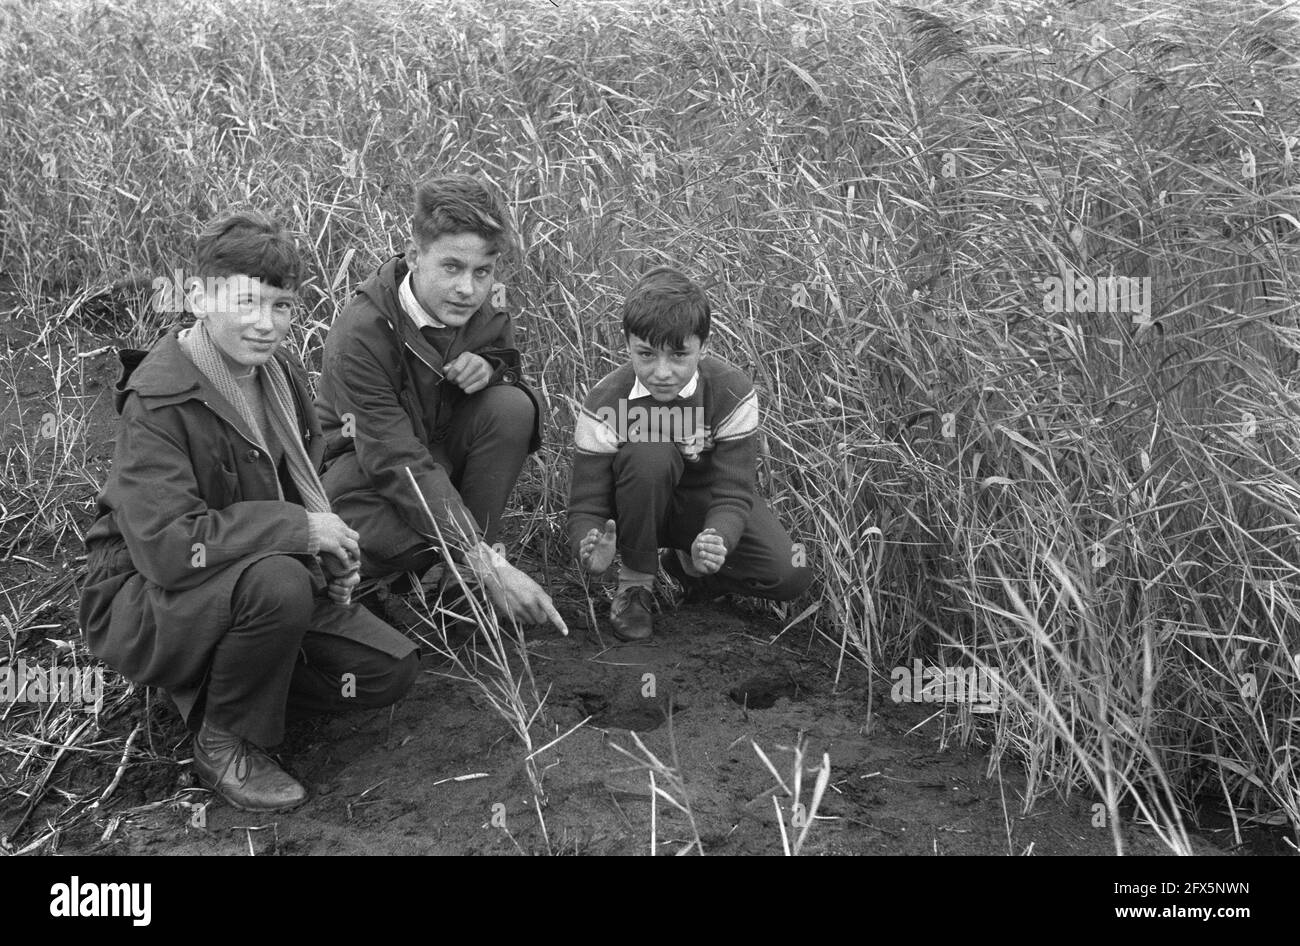 Dangerous (?) projectile found at Naarden, from left to right R. H. Horwitz, H. Tomassen and G. Buur, November 21, 1960, The Netherlands, 20th century press agency photo, news to remember, documentary, historic photography 1945-1990, visual stories, human history of the Twentieth Century, capturing moments in time Stock Photo